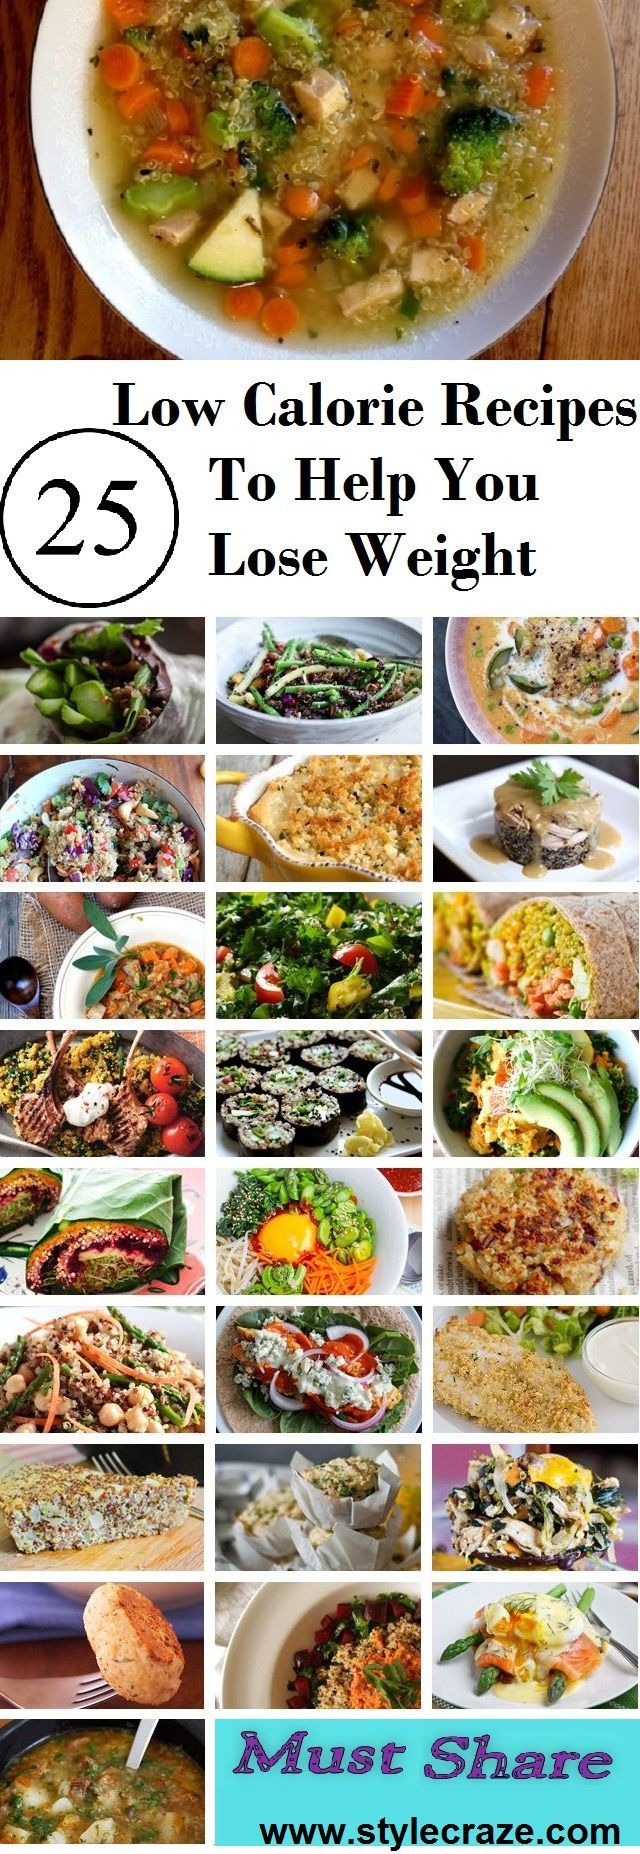 Low Calorie Recipes For Weight Loss